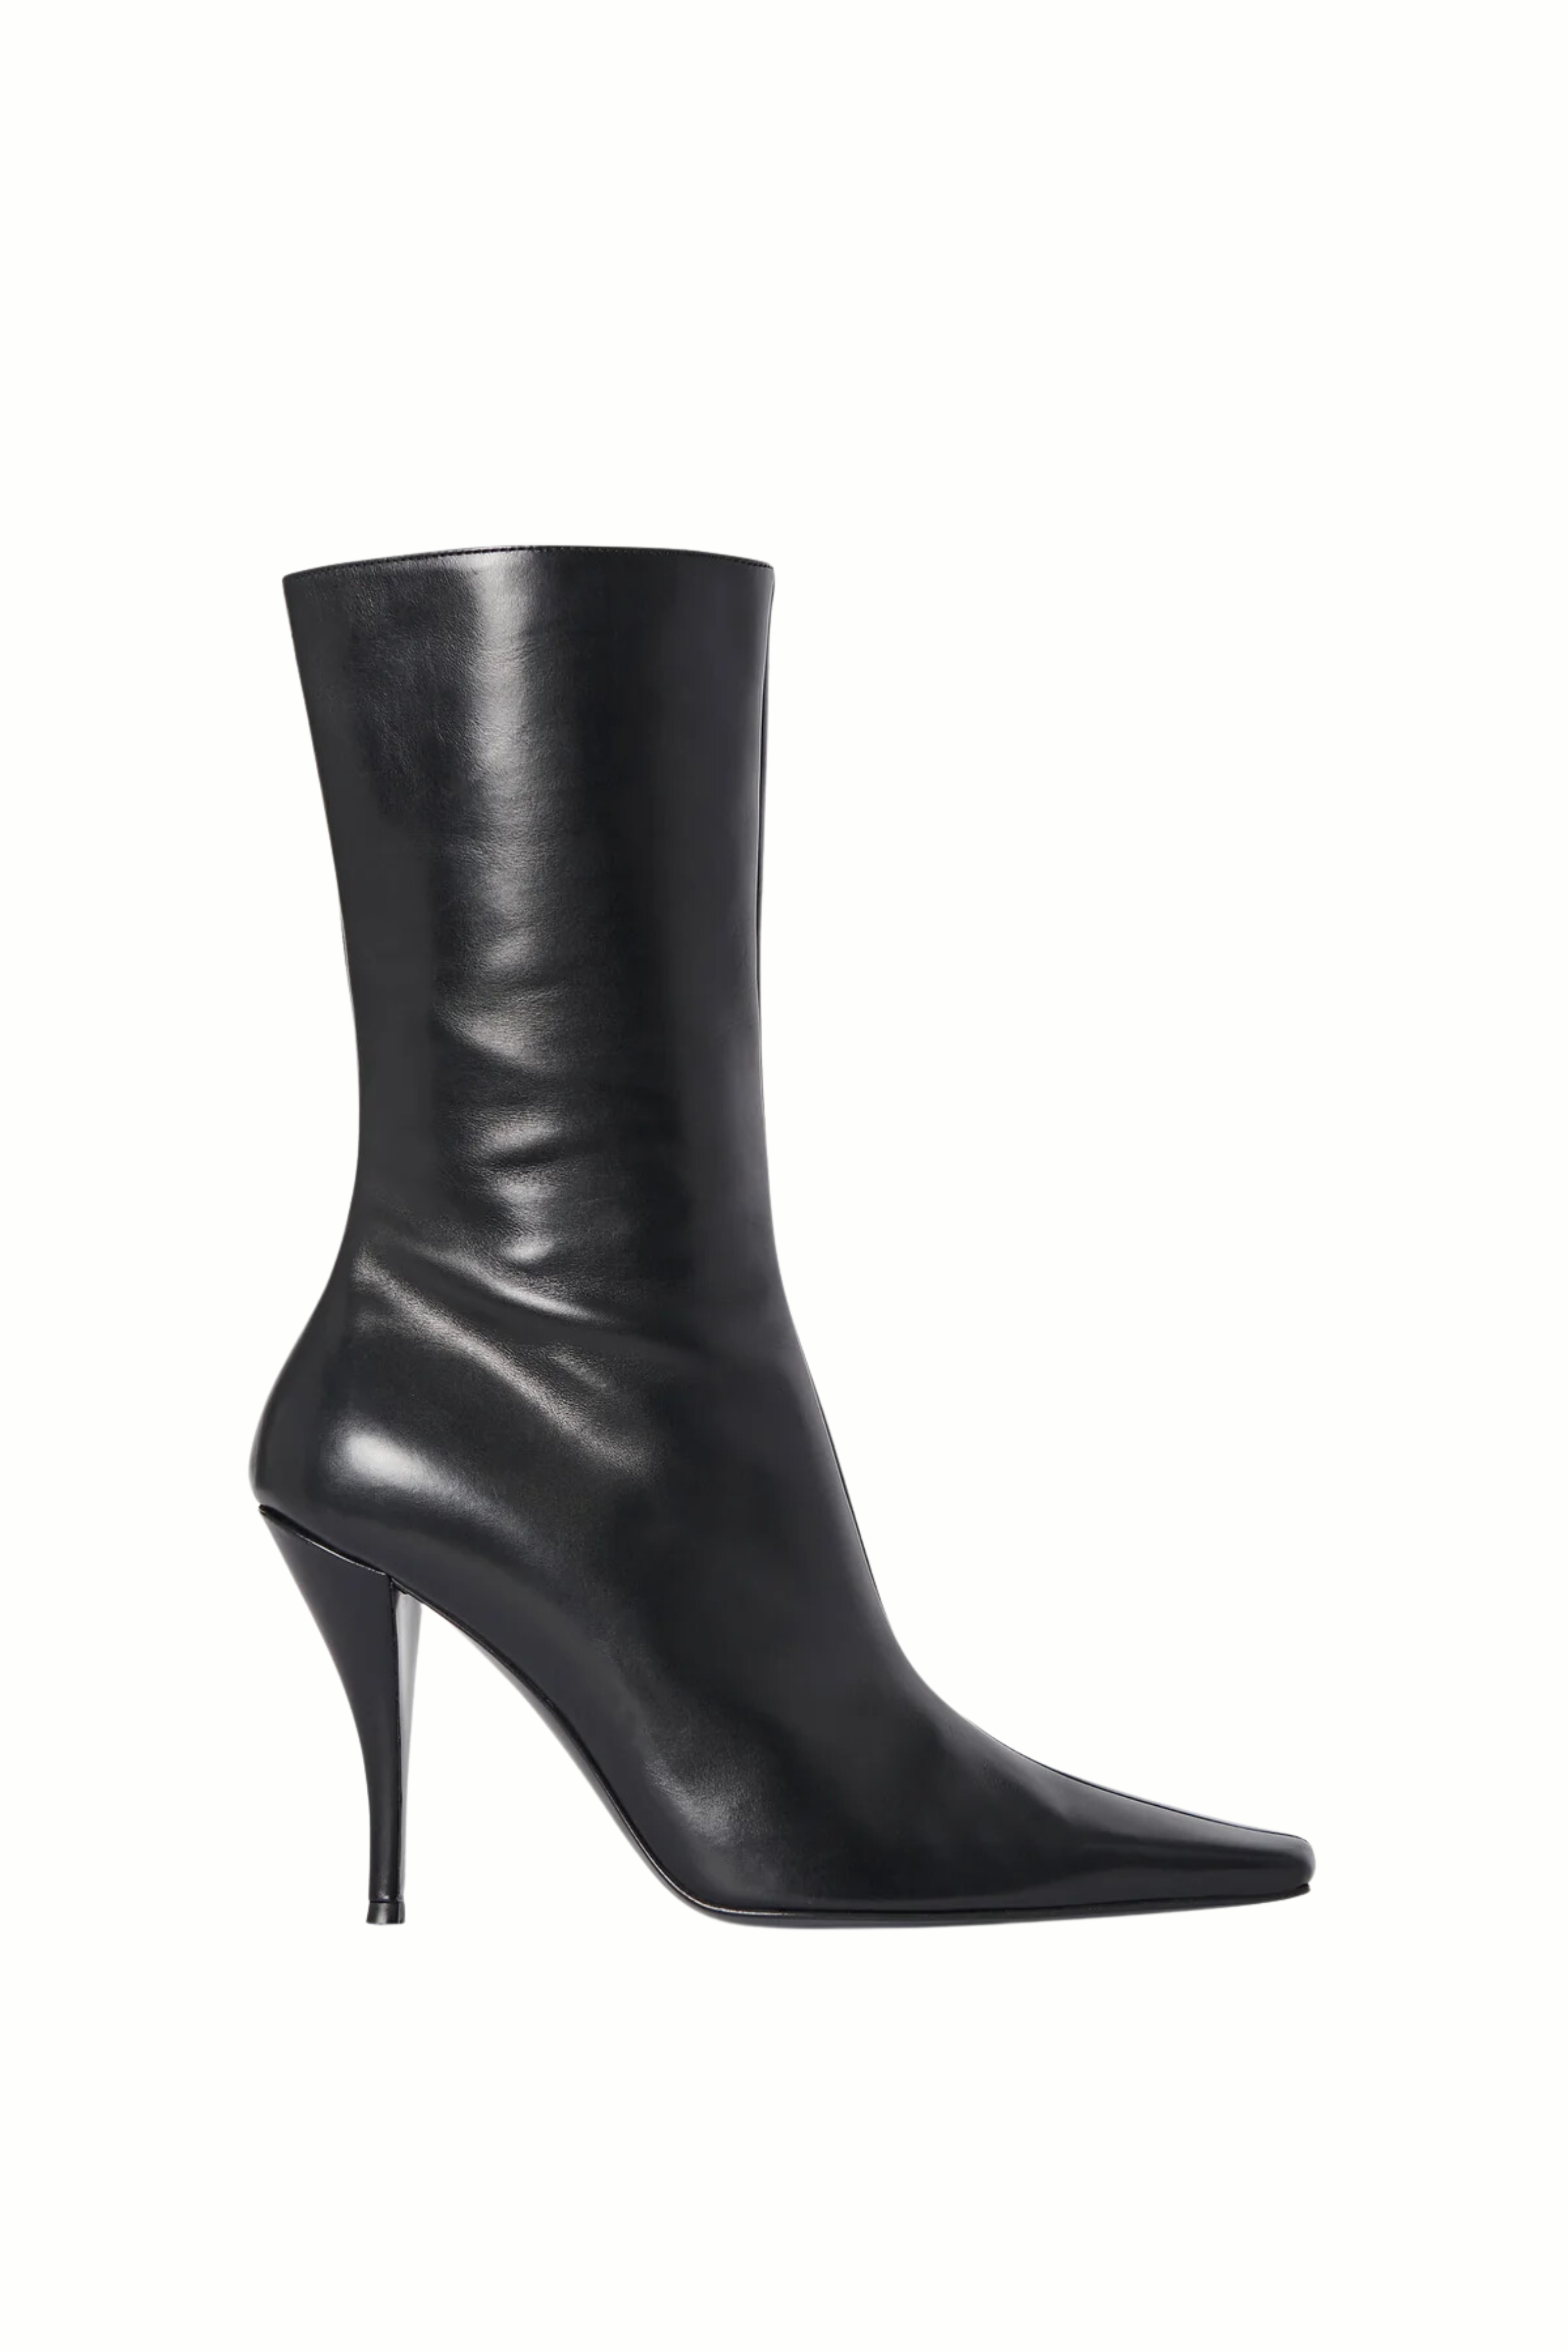 THE ROW Shrimpton High Leather Boots